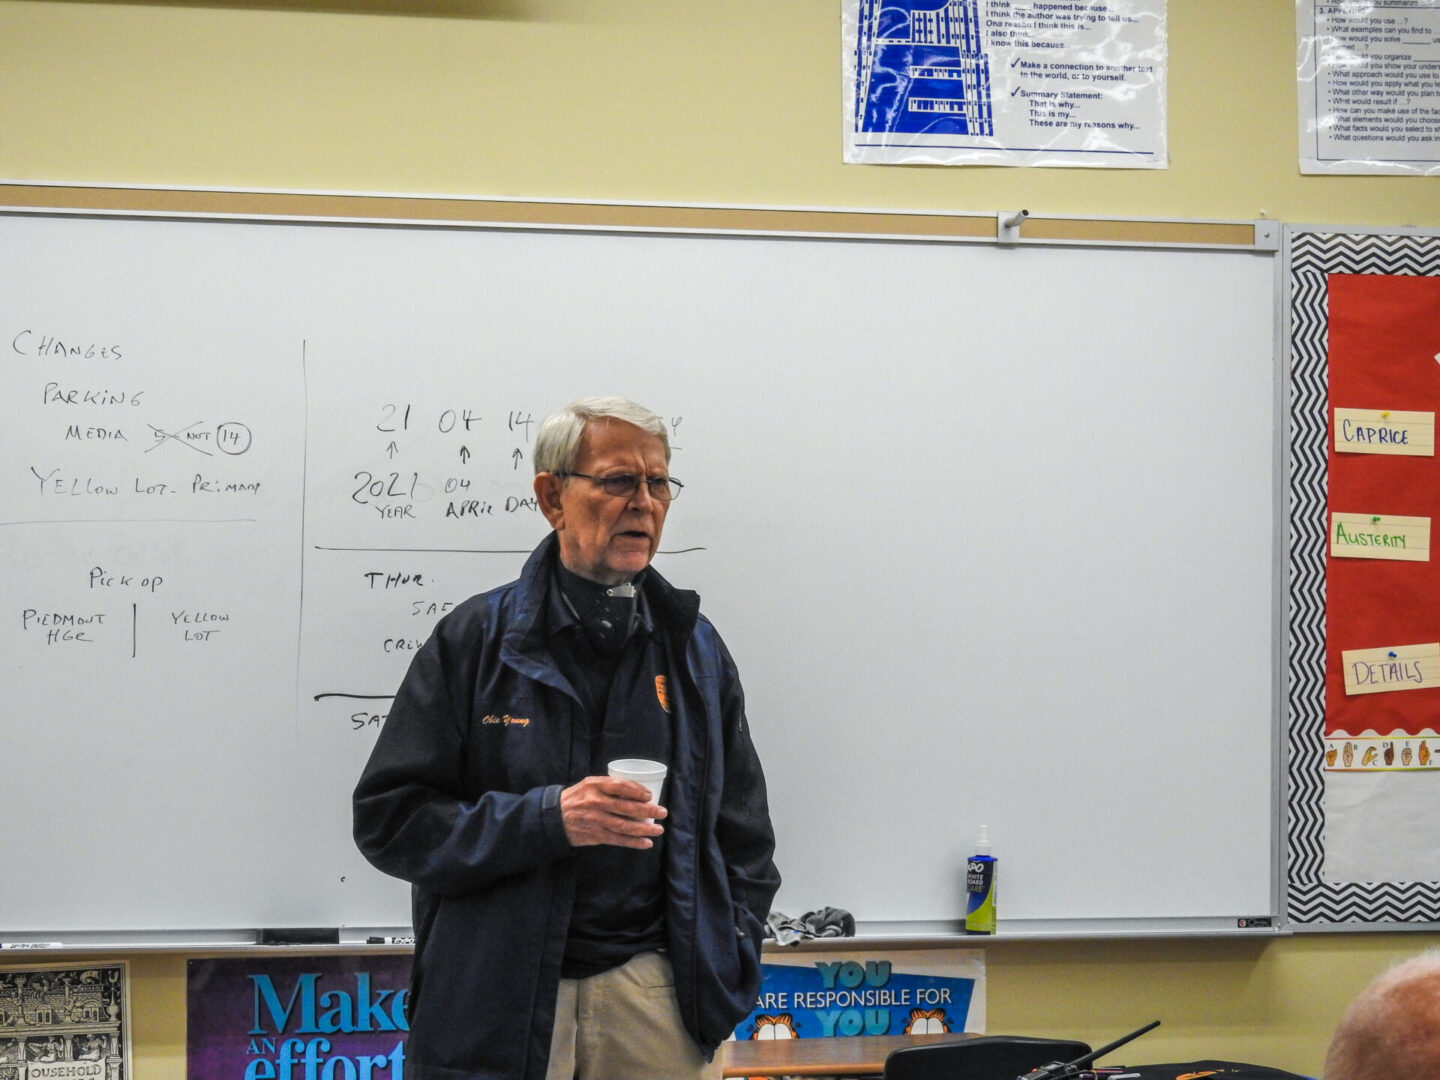 A man standing in front of a whiteboard holding a cup.